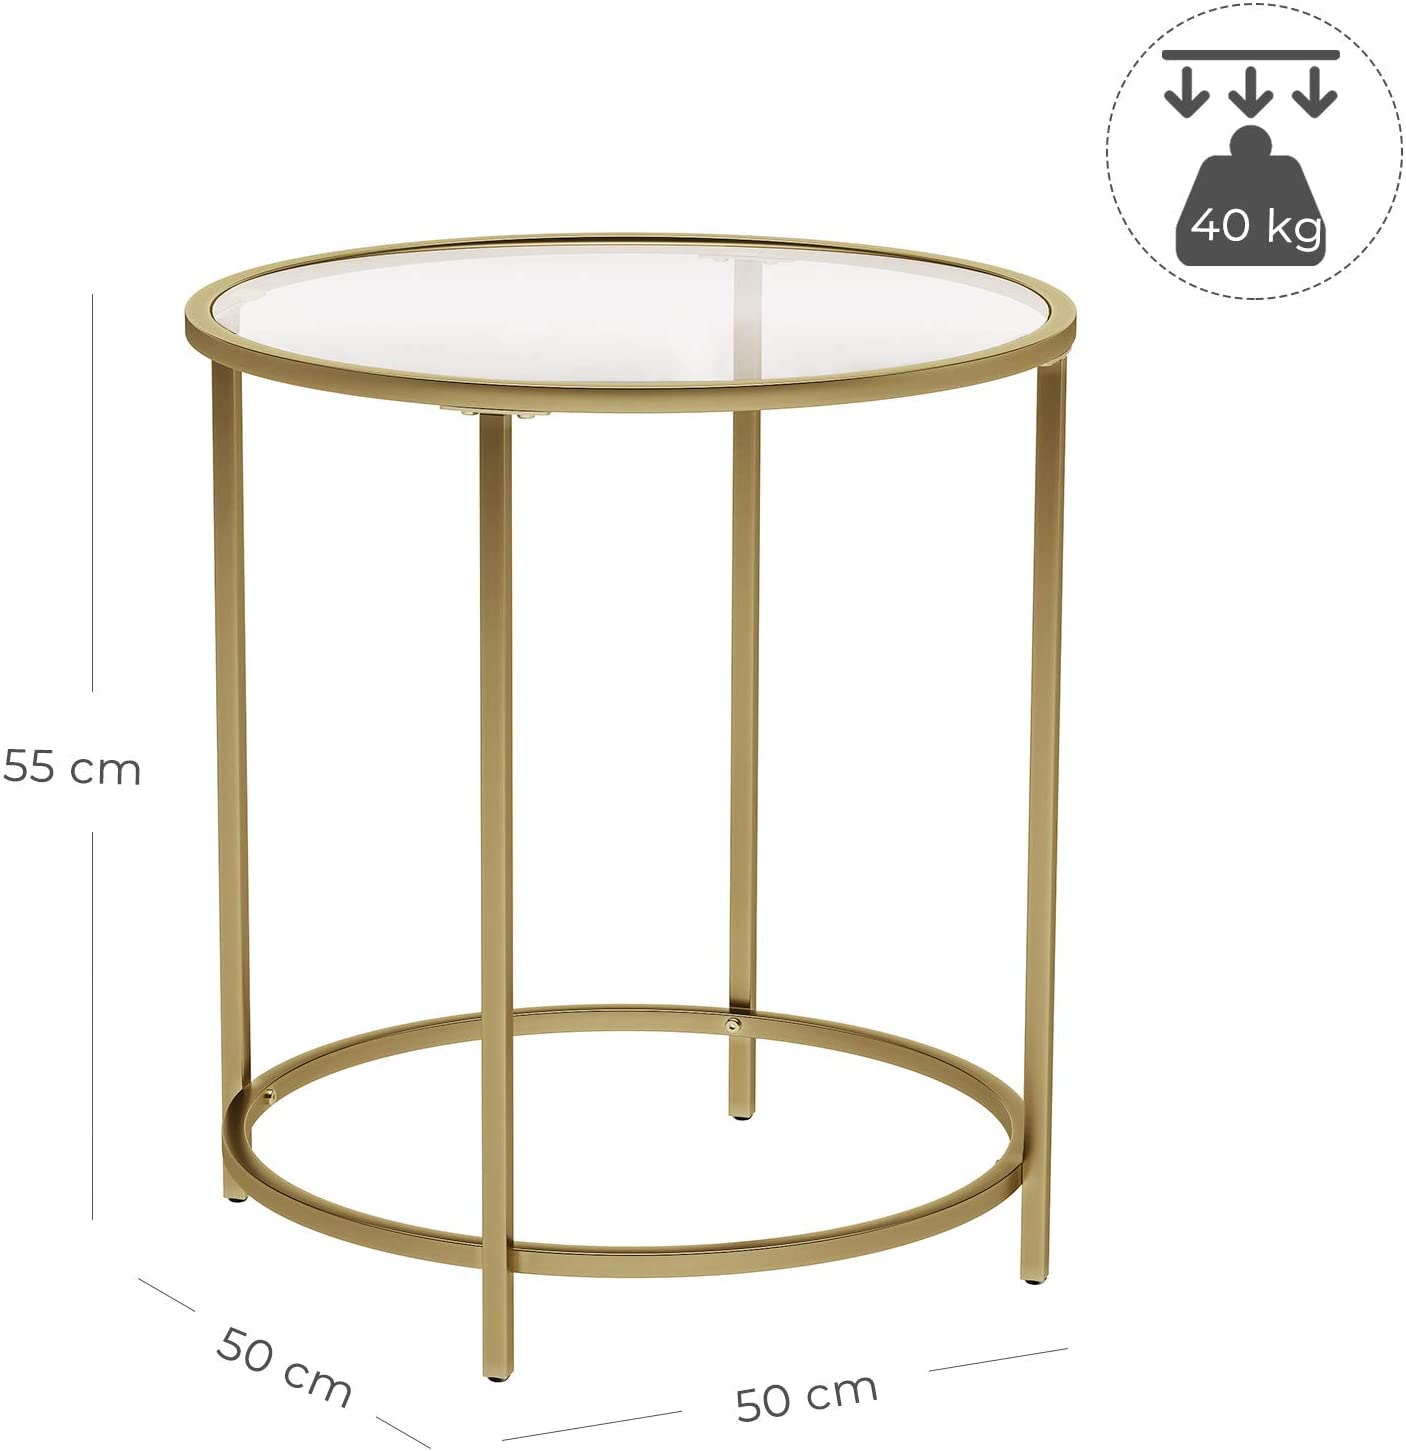 Round Side Table, Tempered Glass End Table With Golden metal Frame, Small Coffee Table, Bedside Table, Living Room, Balcony, Robust and Stable, Decorative, Gold LGT20G RAW58.dk 